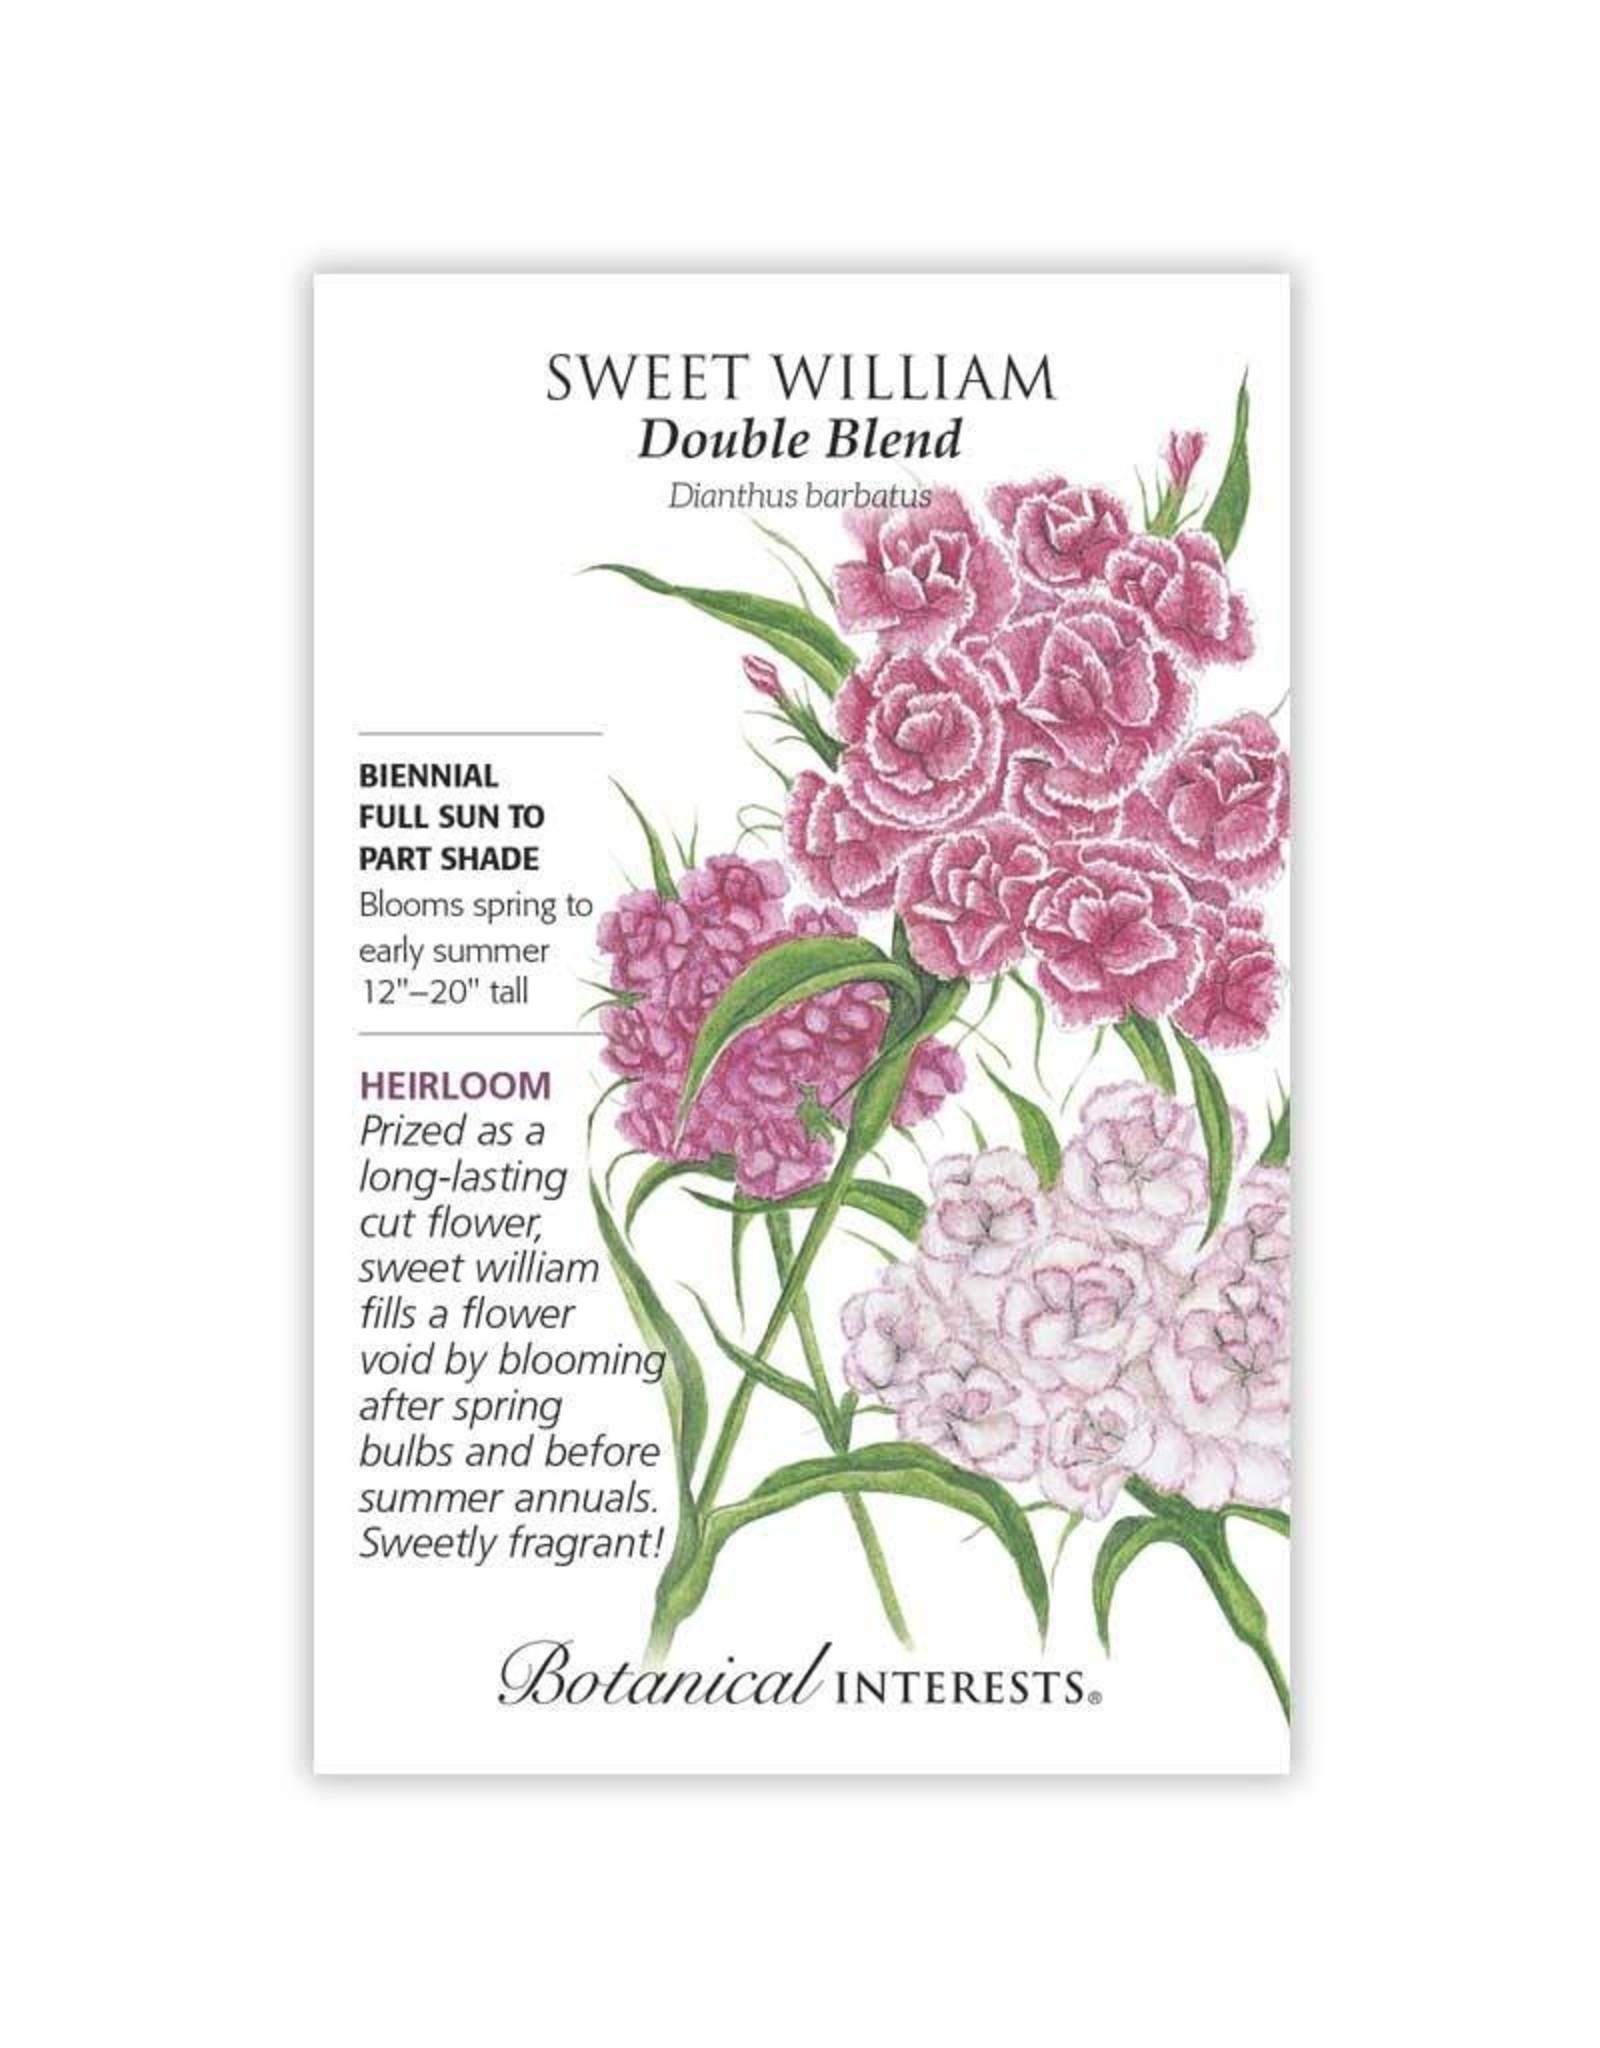 Sweet William Double Blend